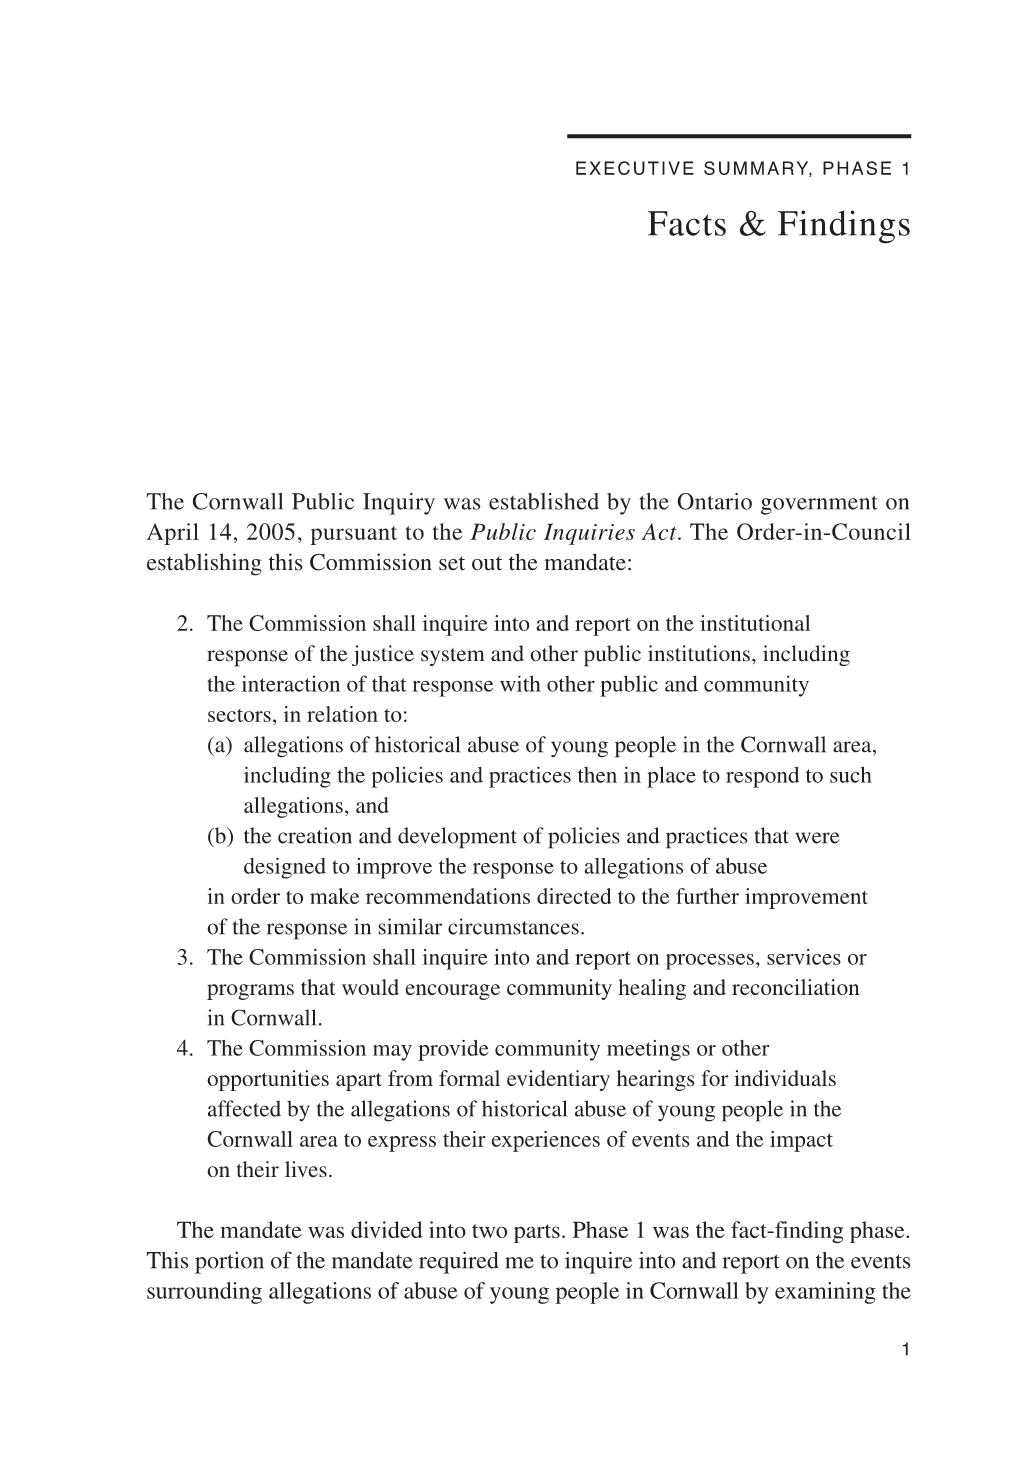 Report of the Cornwall Public Inquiry